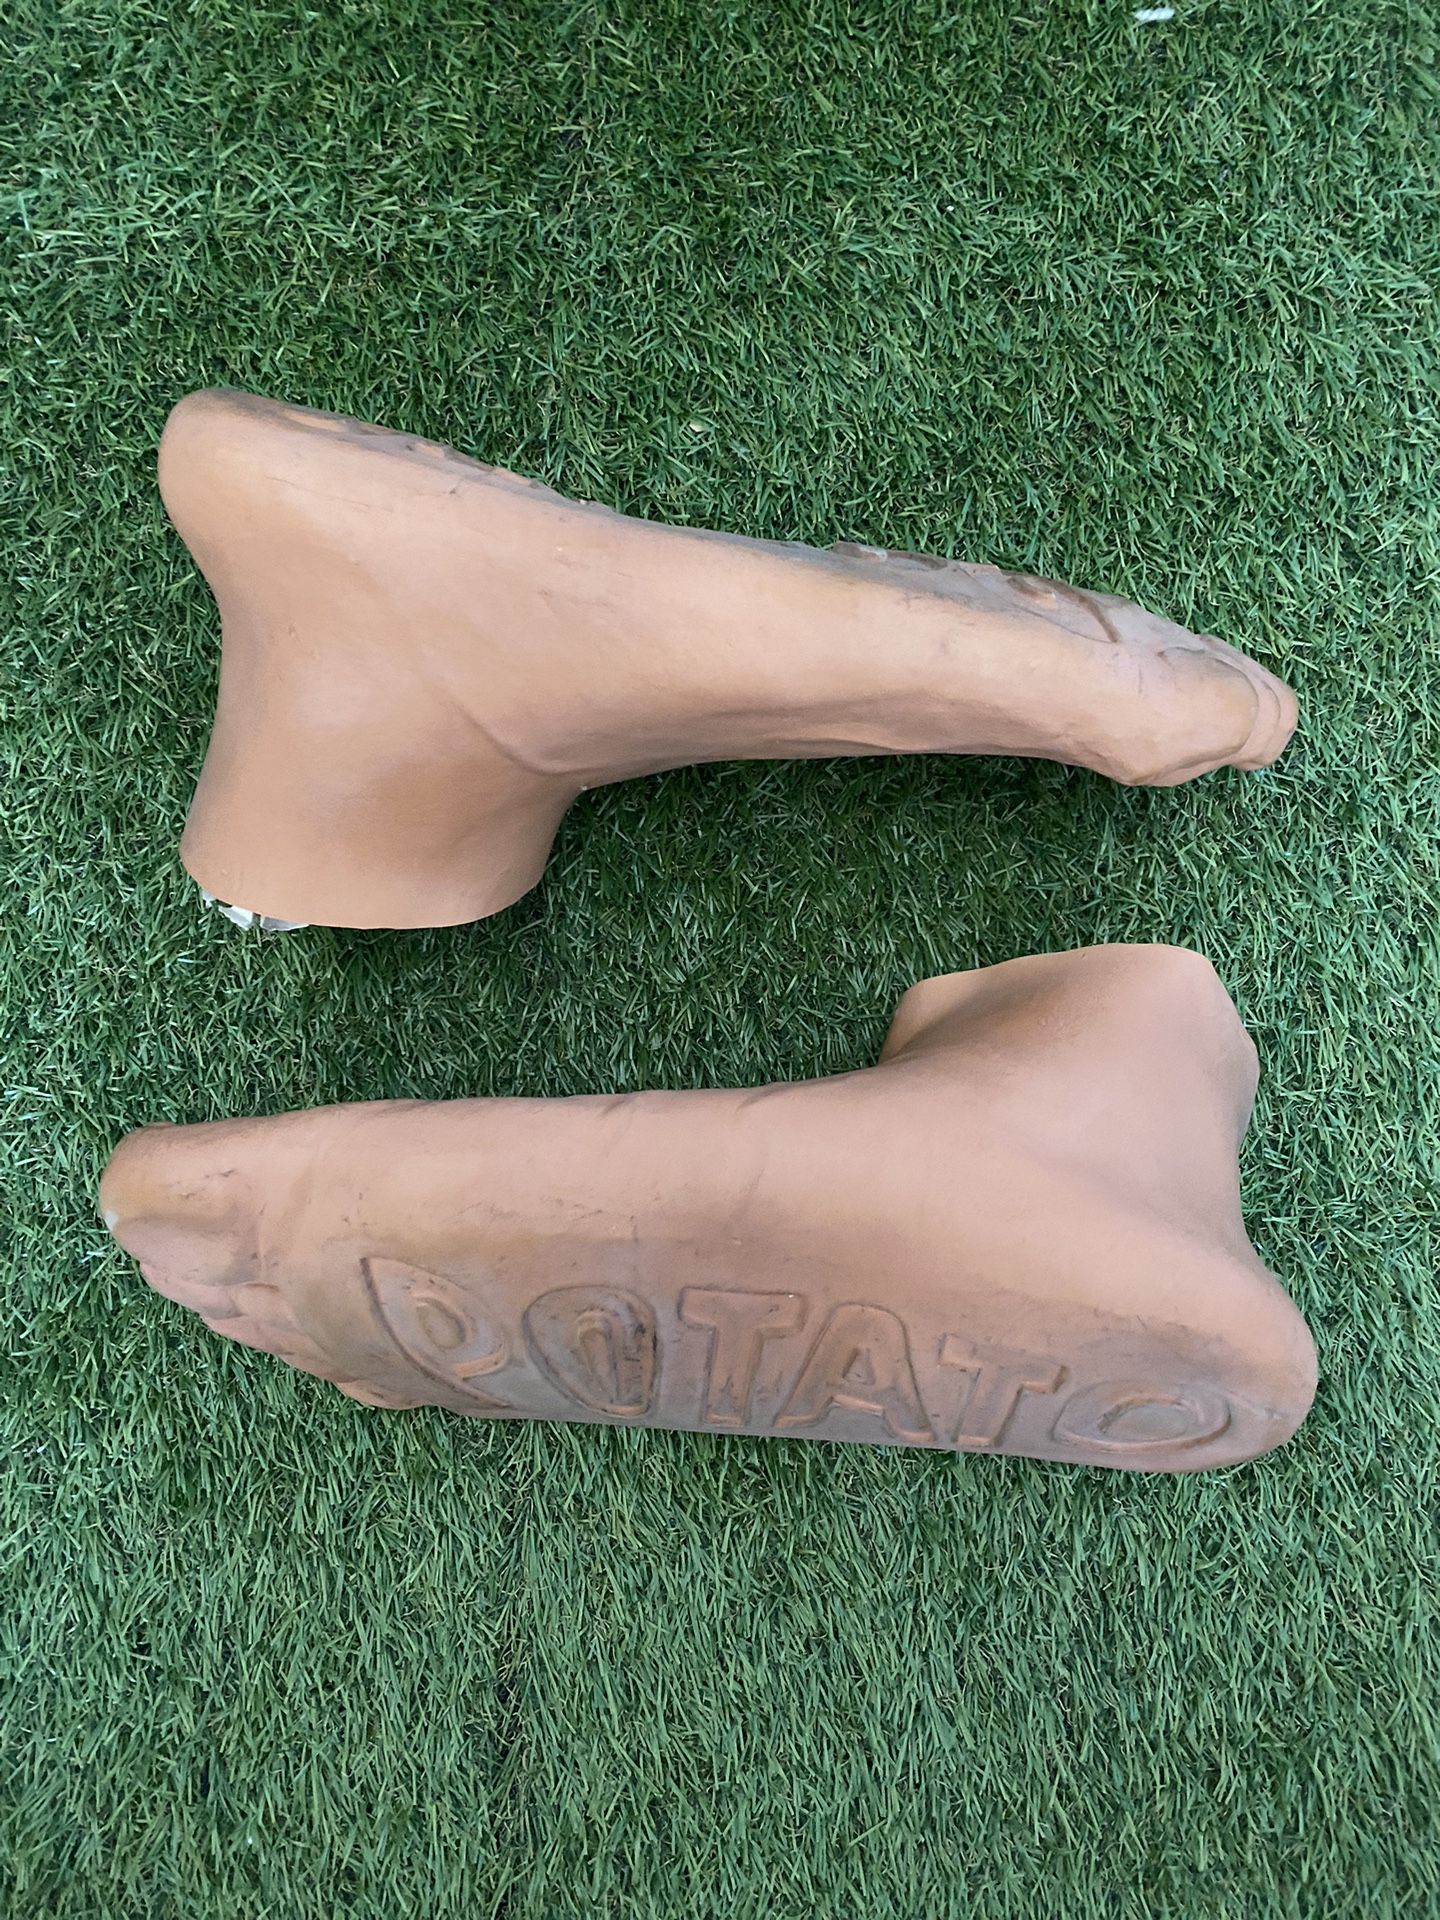 Imran Potato Caveman Feet Shoes for Sale in Los Angeles, CA - OfferUp